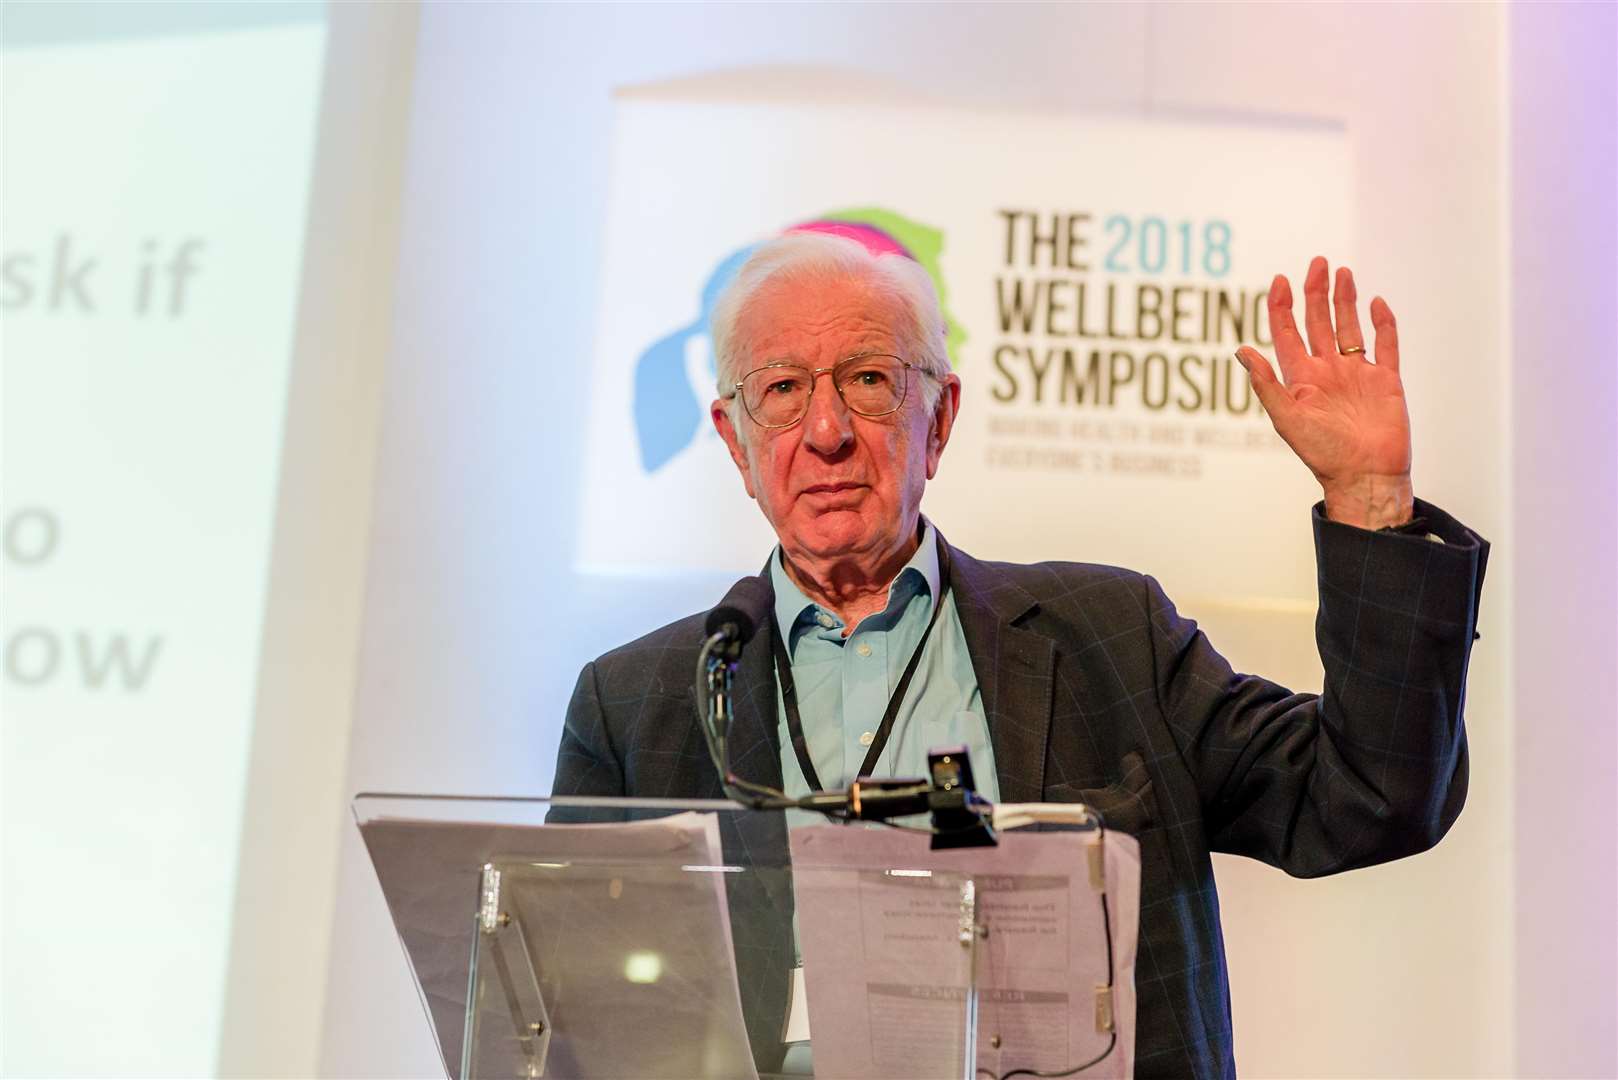 Lord Richard Layard of Action for Happiness speaks at the Wellbeing Symposium